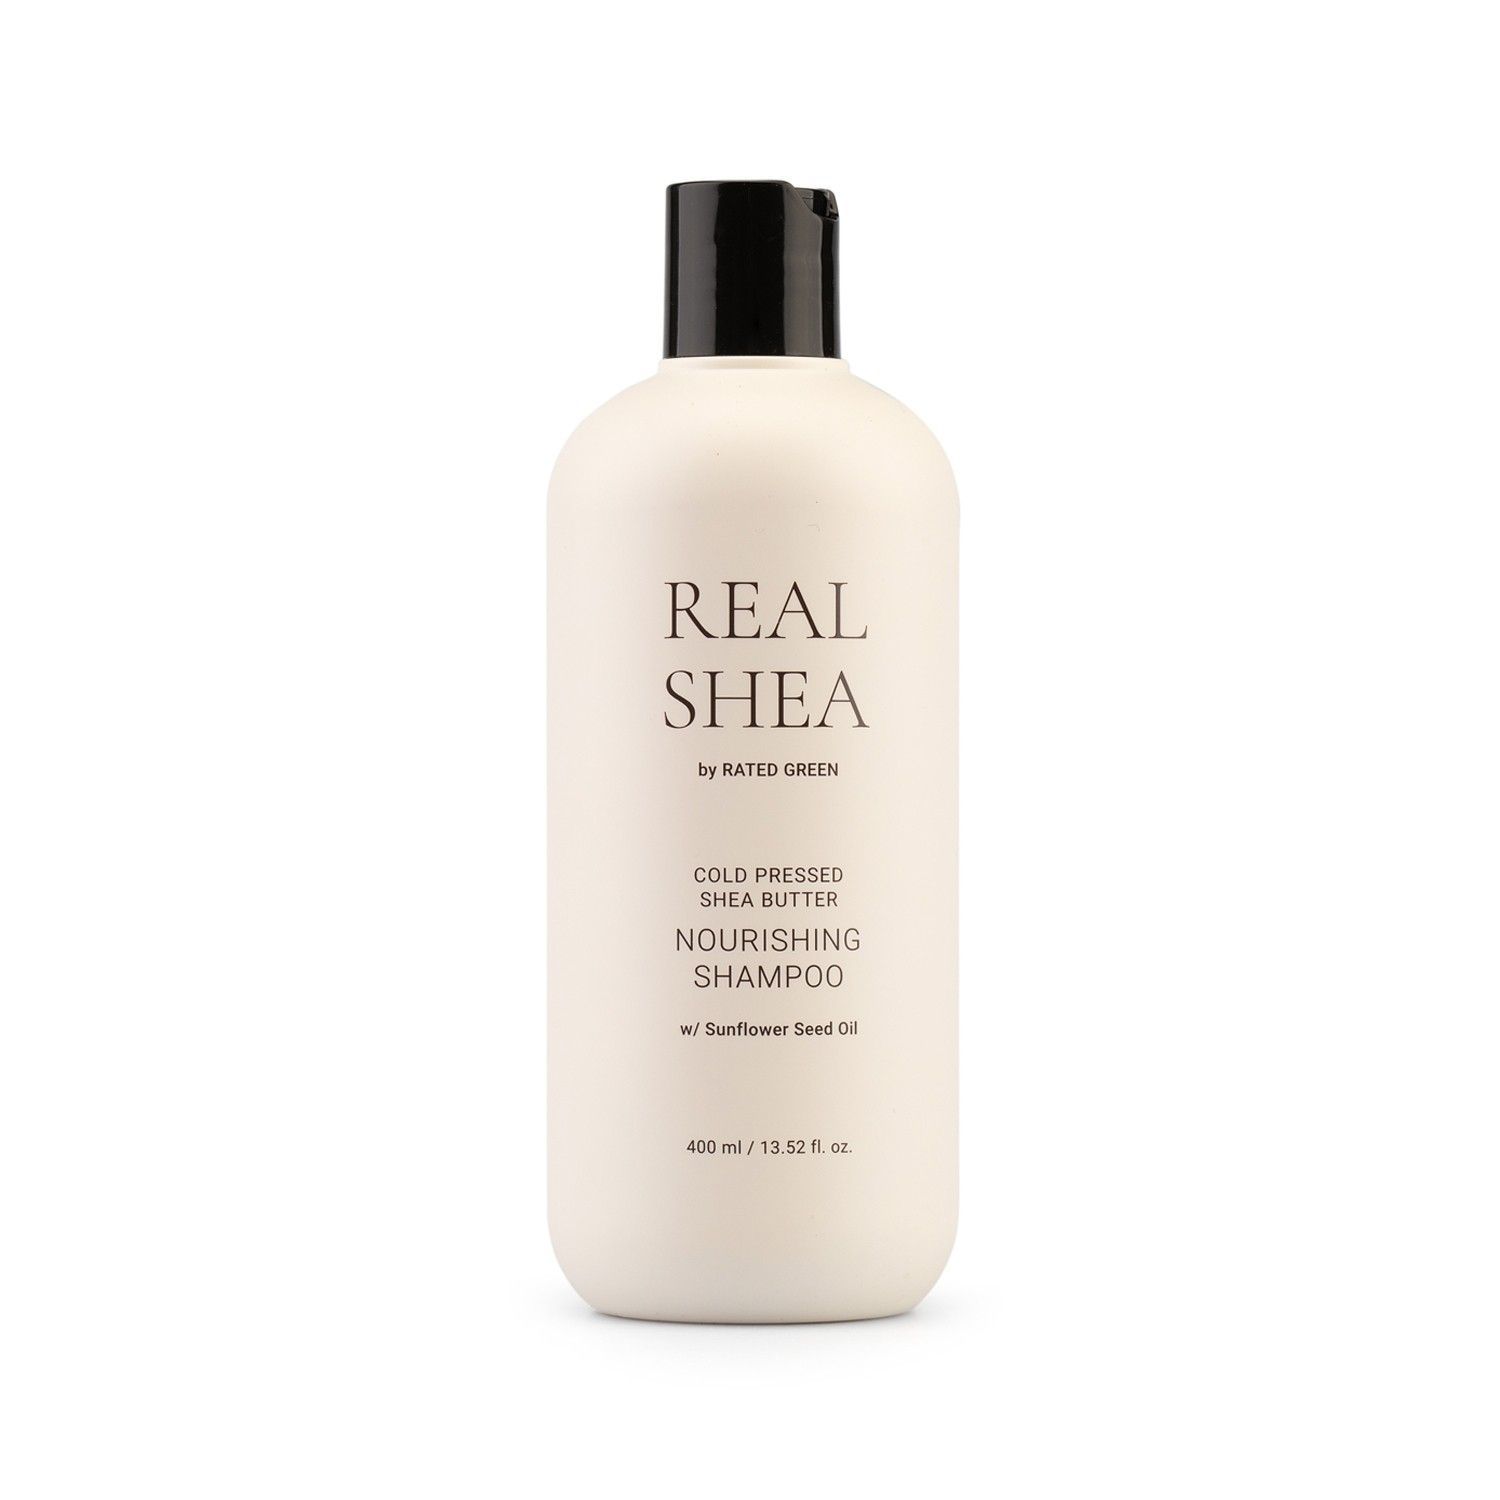 RATED GREEN Cold Pressed Shea Butter Nourishing Shampoo